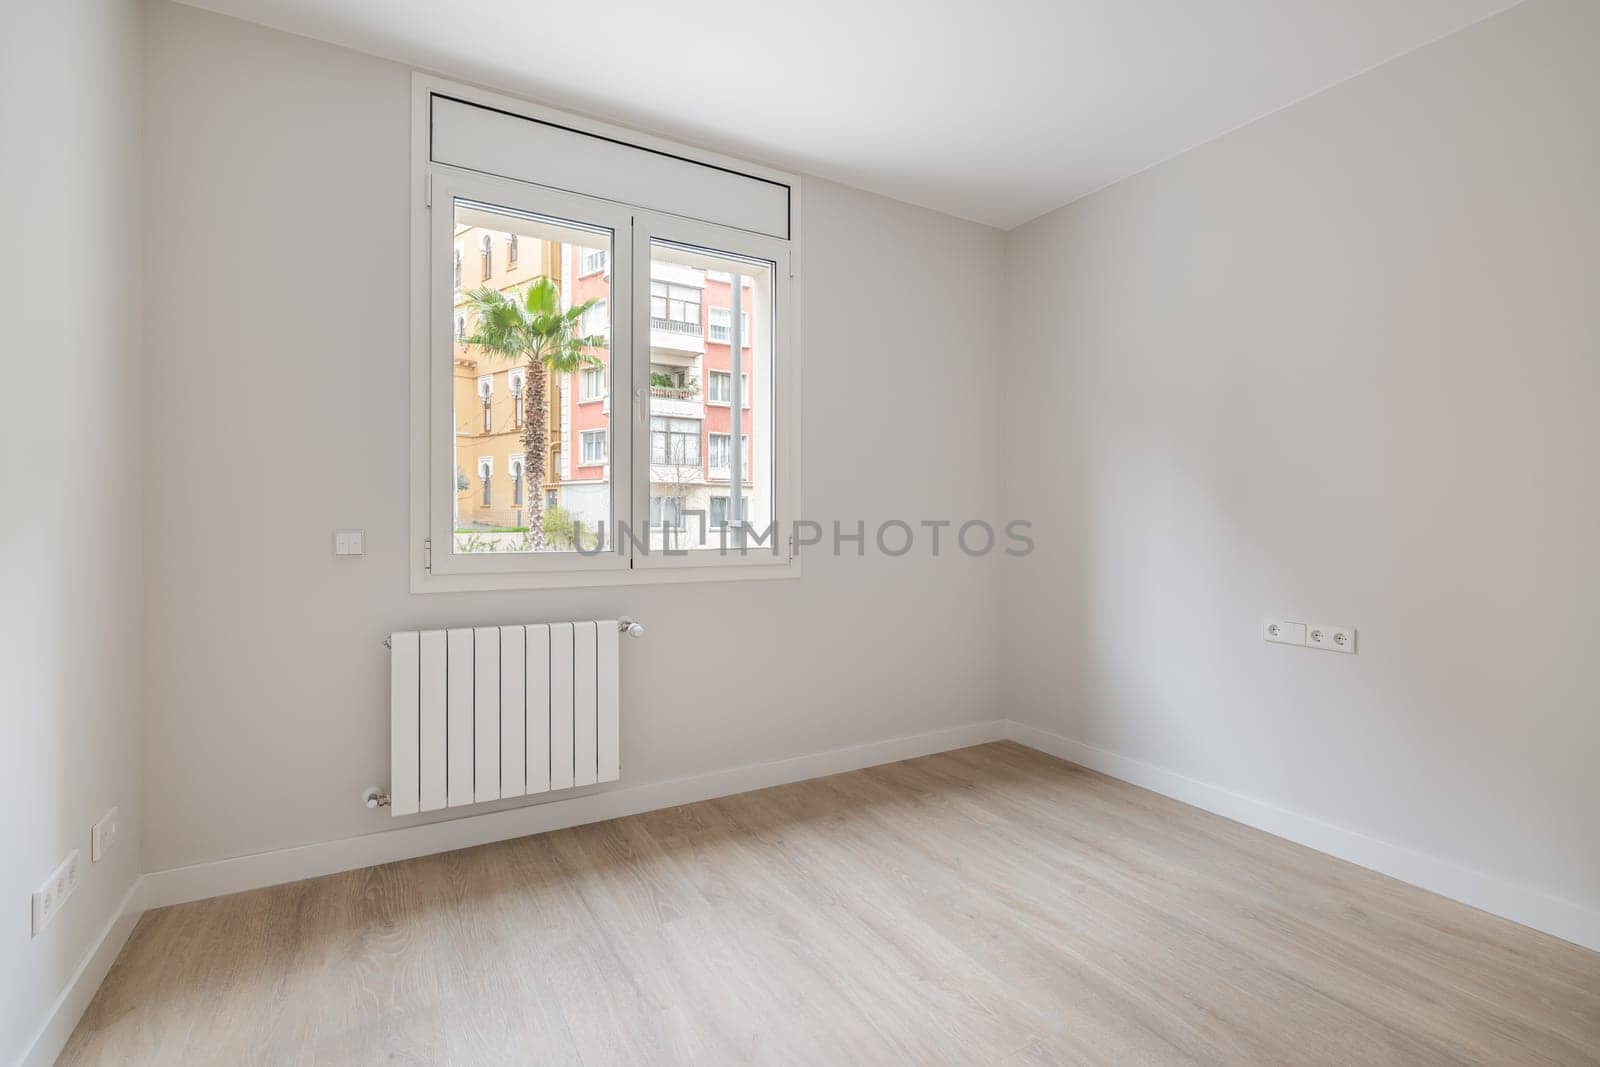 Interior of a modern apartment with empty room.